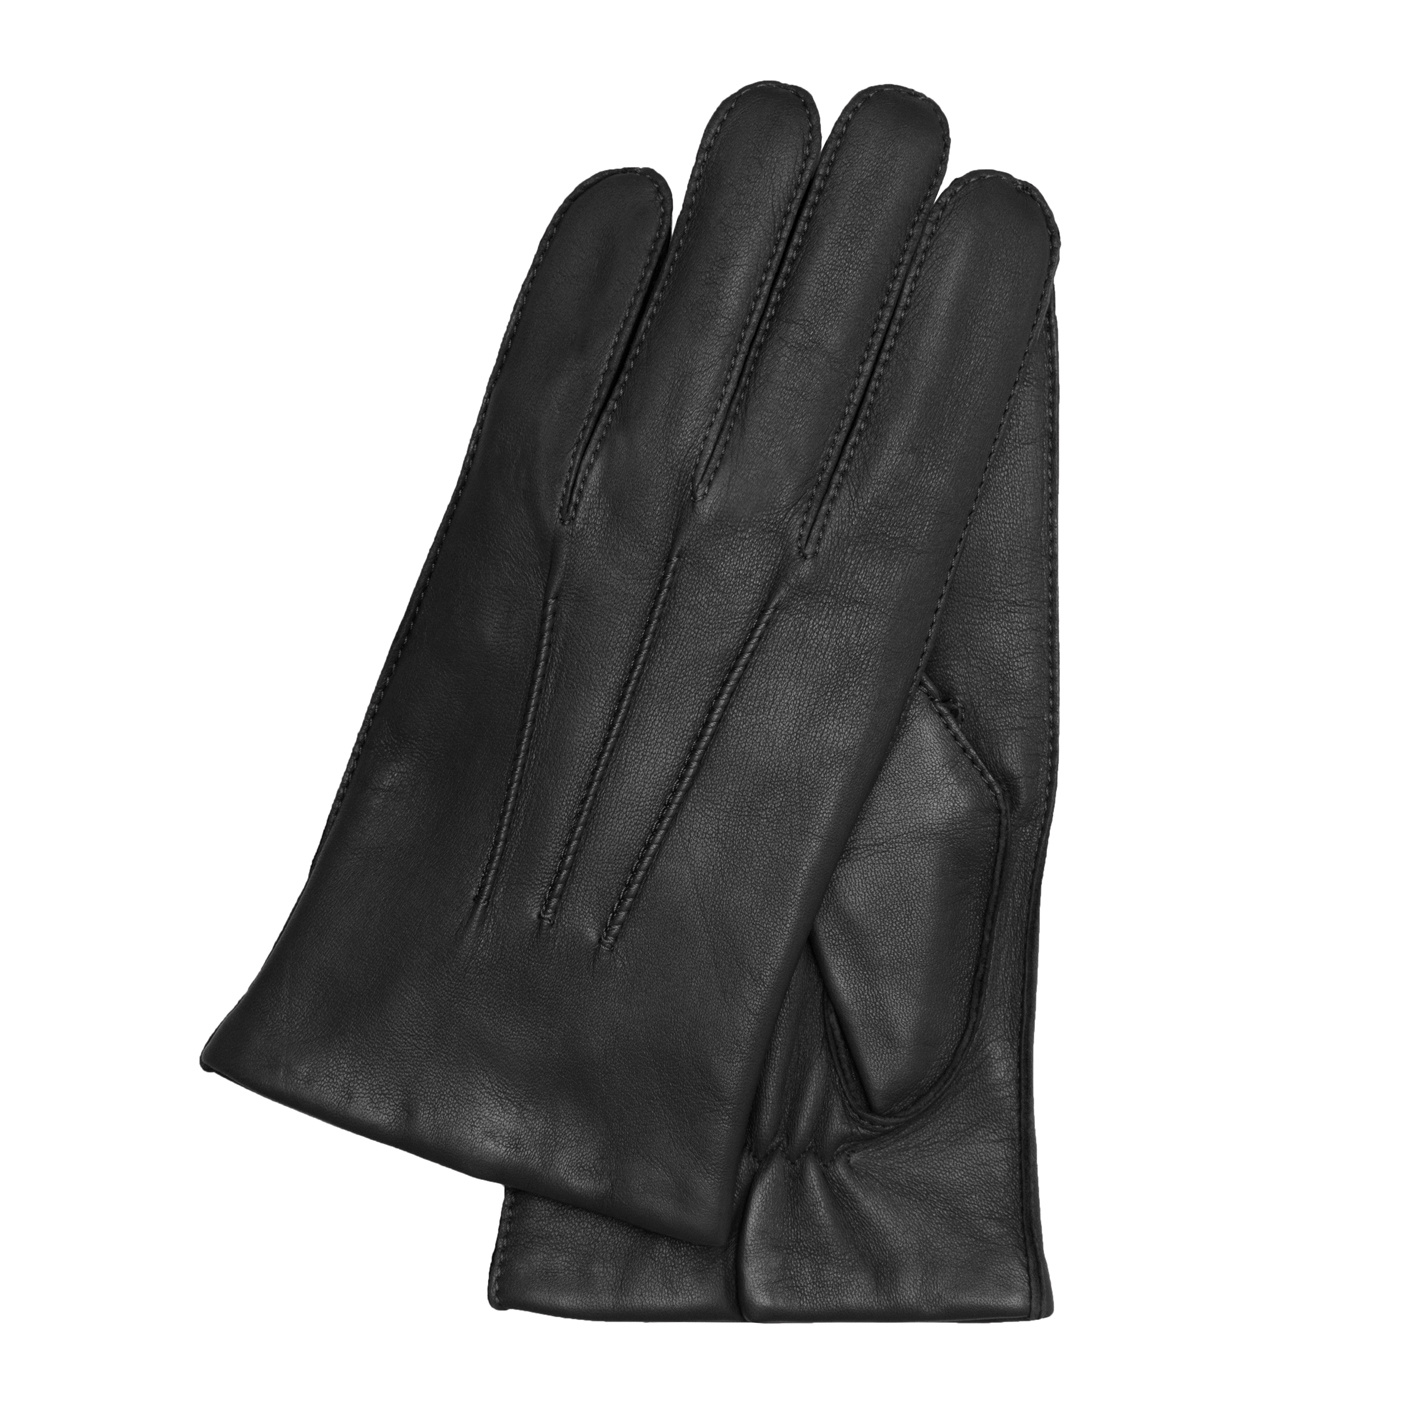 Black Leather Glove - Kessler - Boots by M